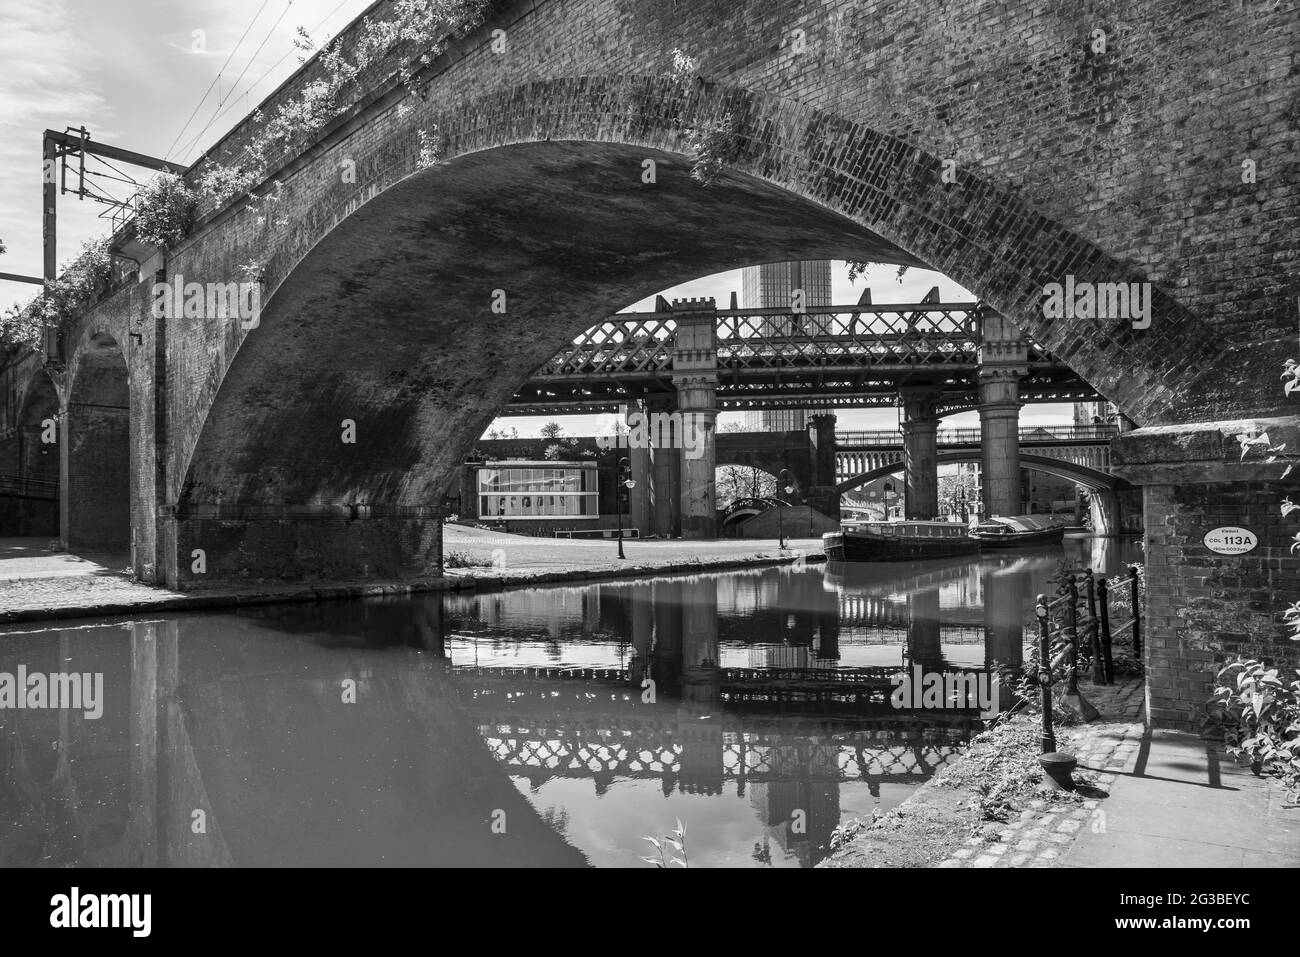 Old railway bridges at Castlefield, an Urban heritage park in the middle of the city of Manchester, Northern England. Stock Photo